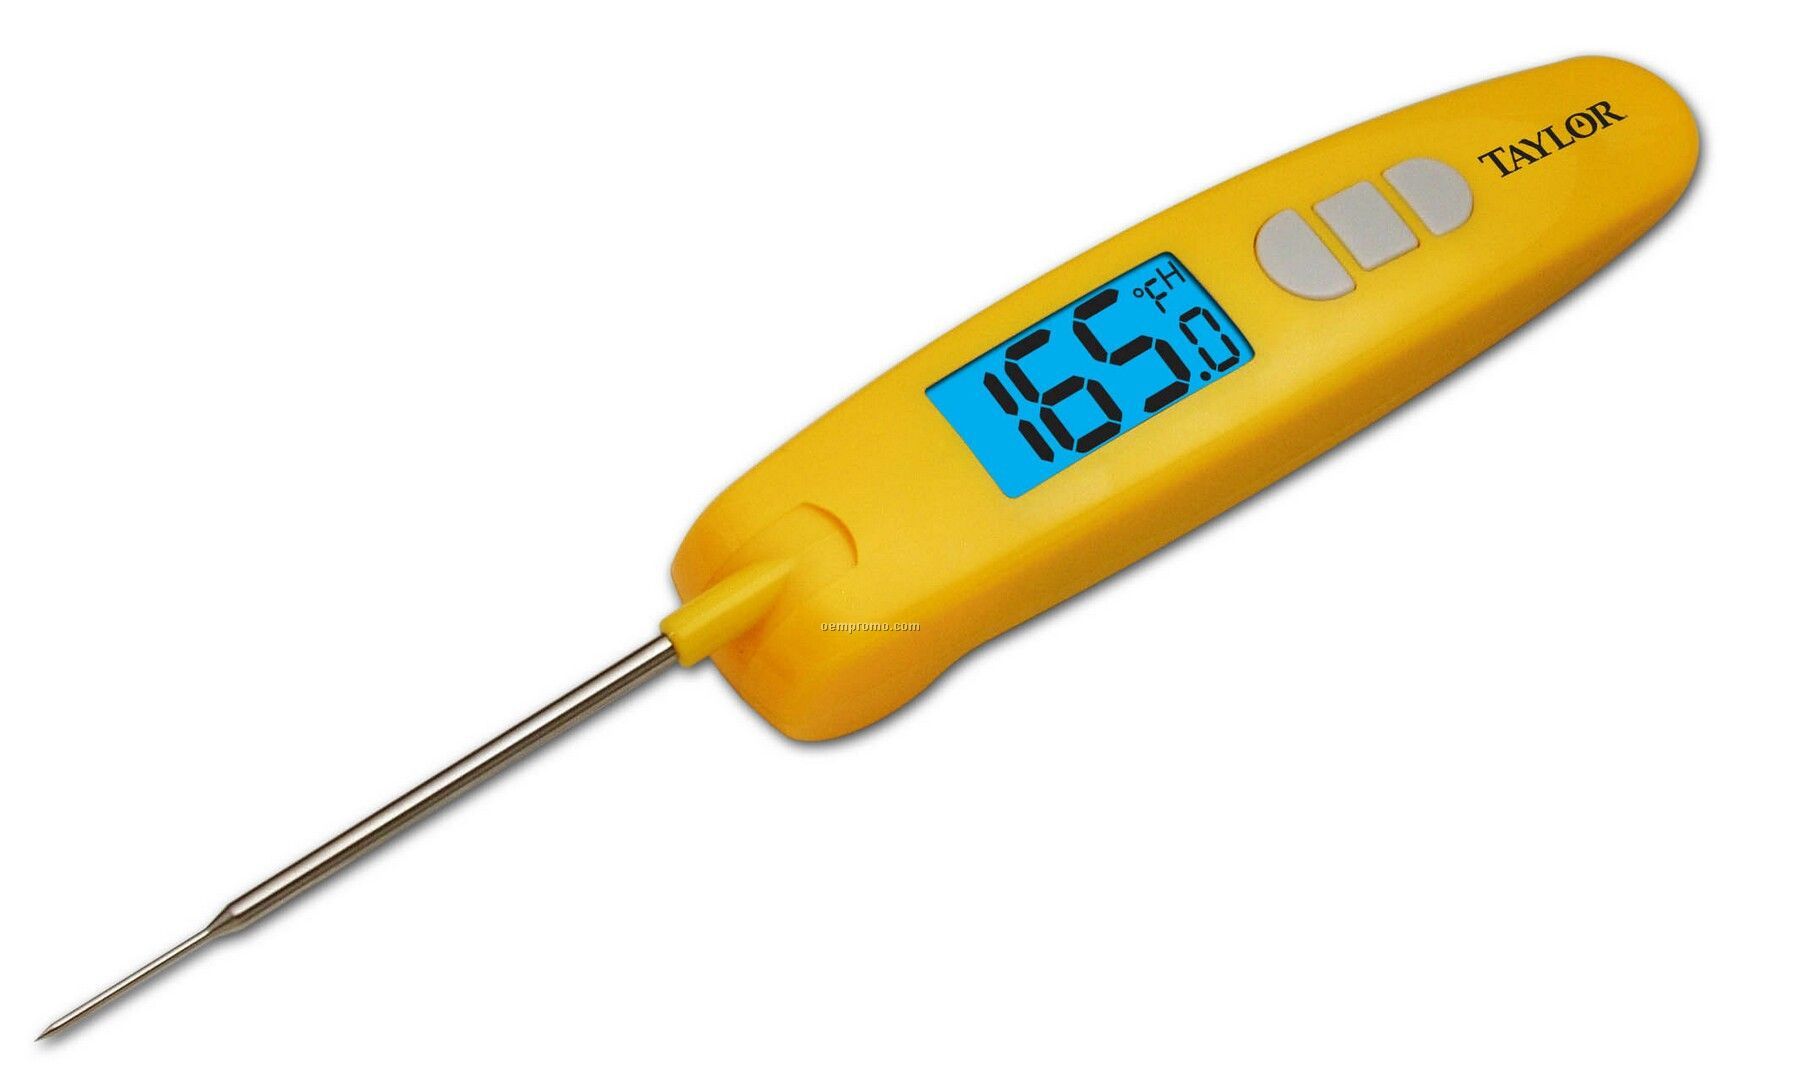 Taylor Digital Thermocouple Thermometer With Folding Probe